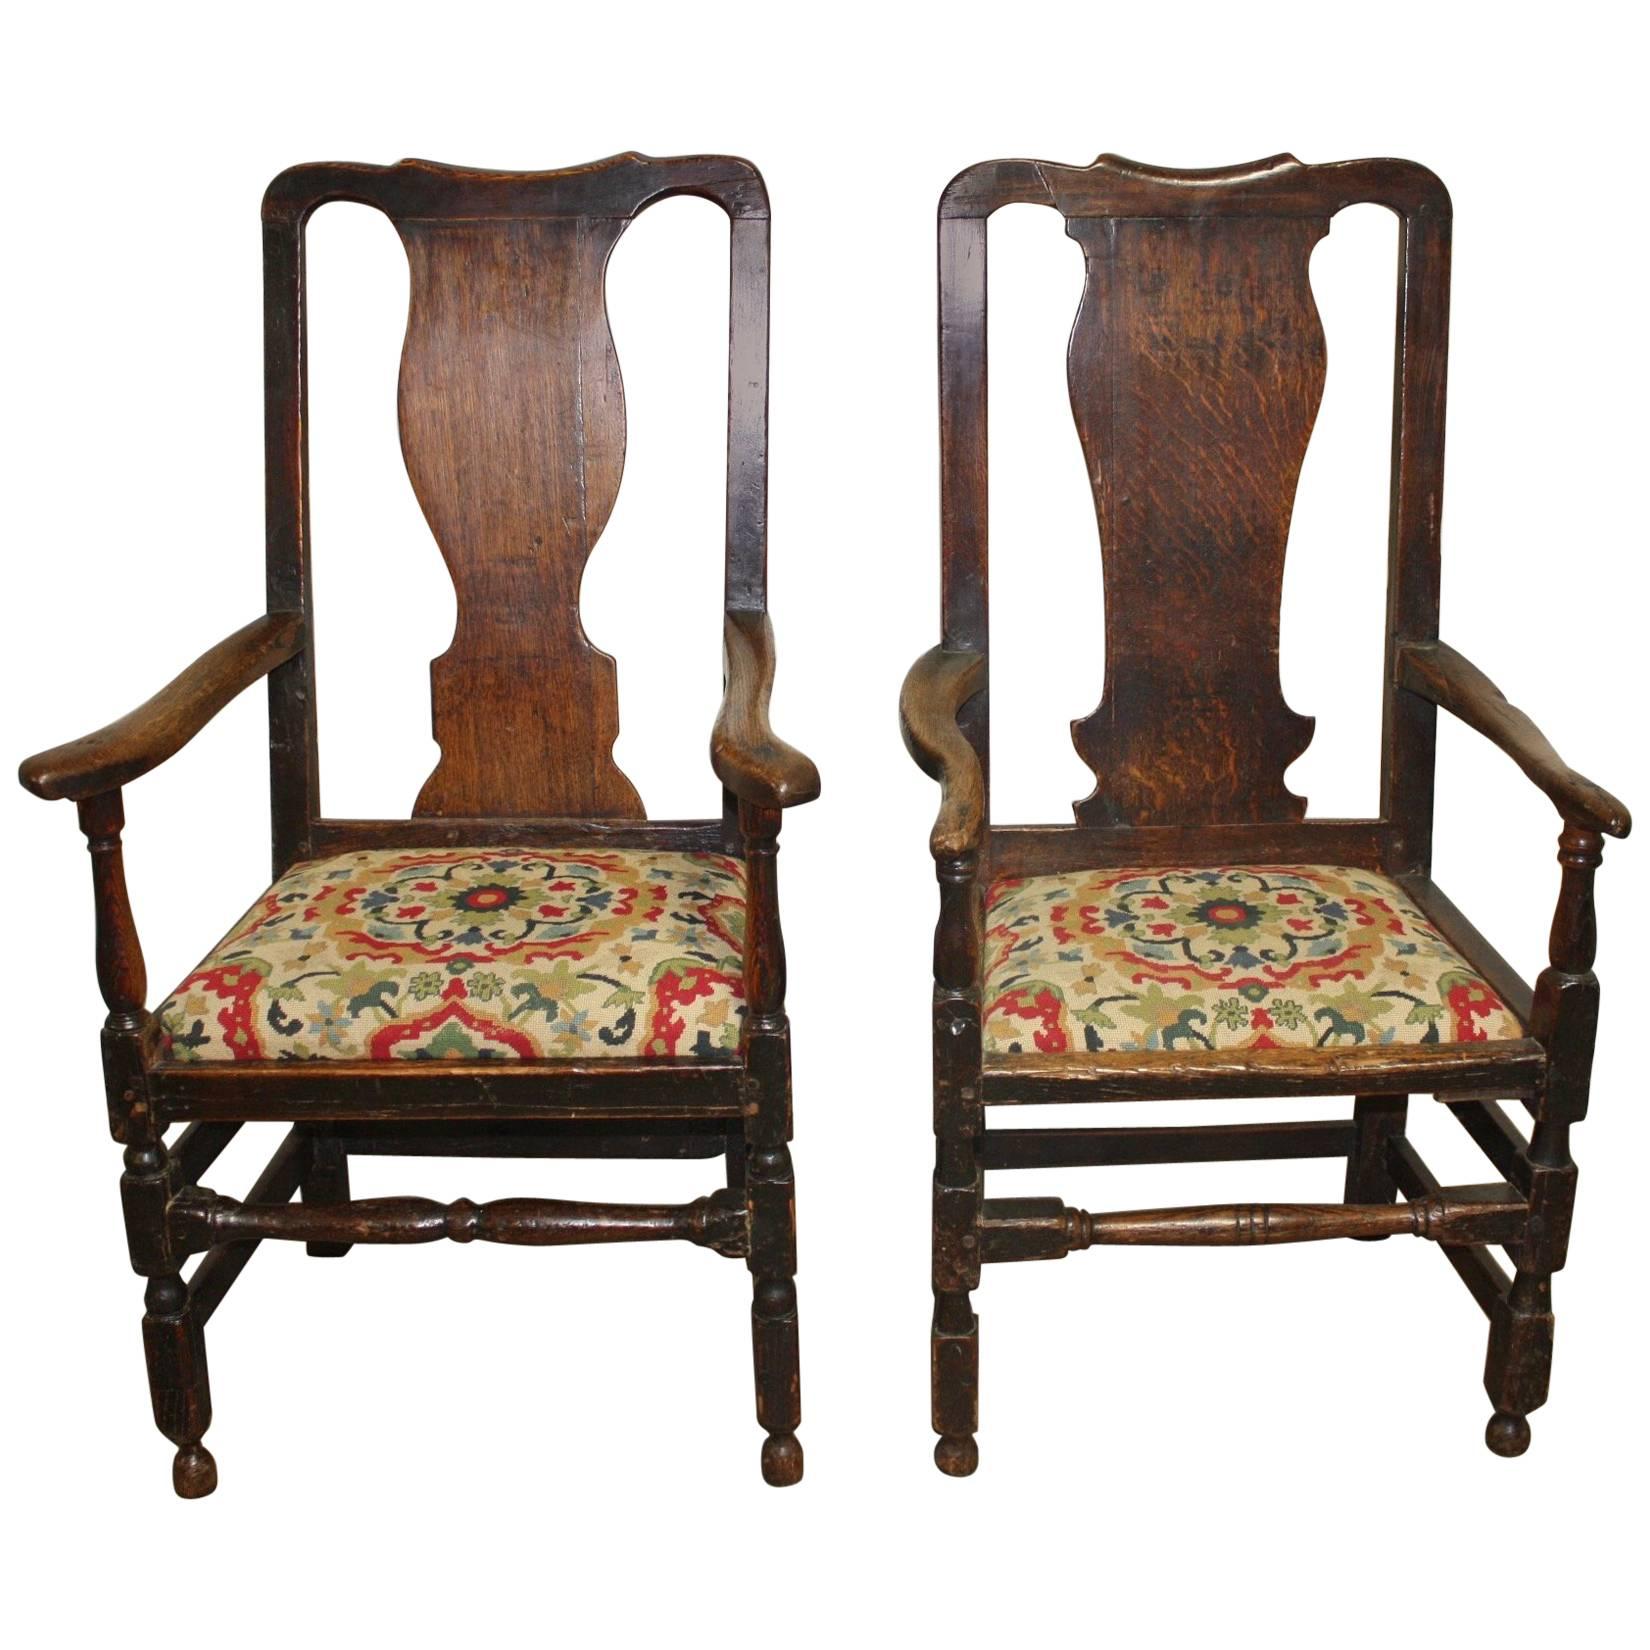 Magnificent Pair of 17th Century Armchairs